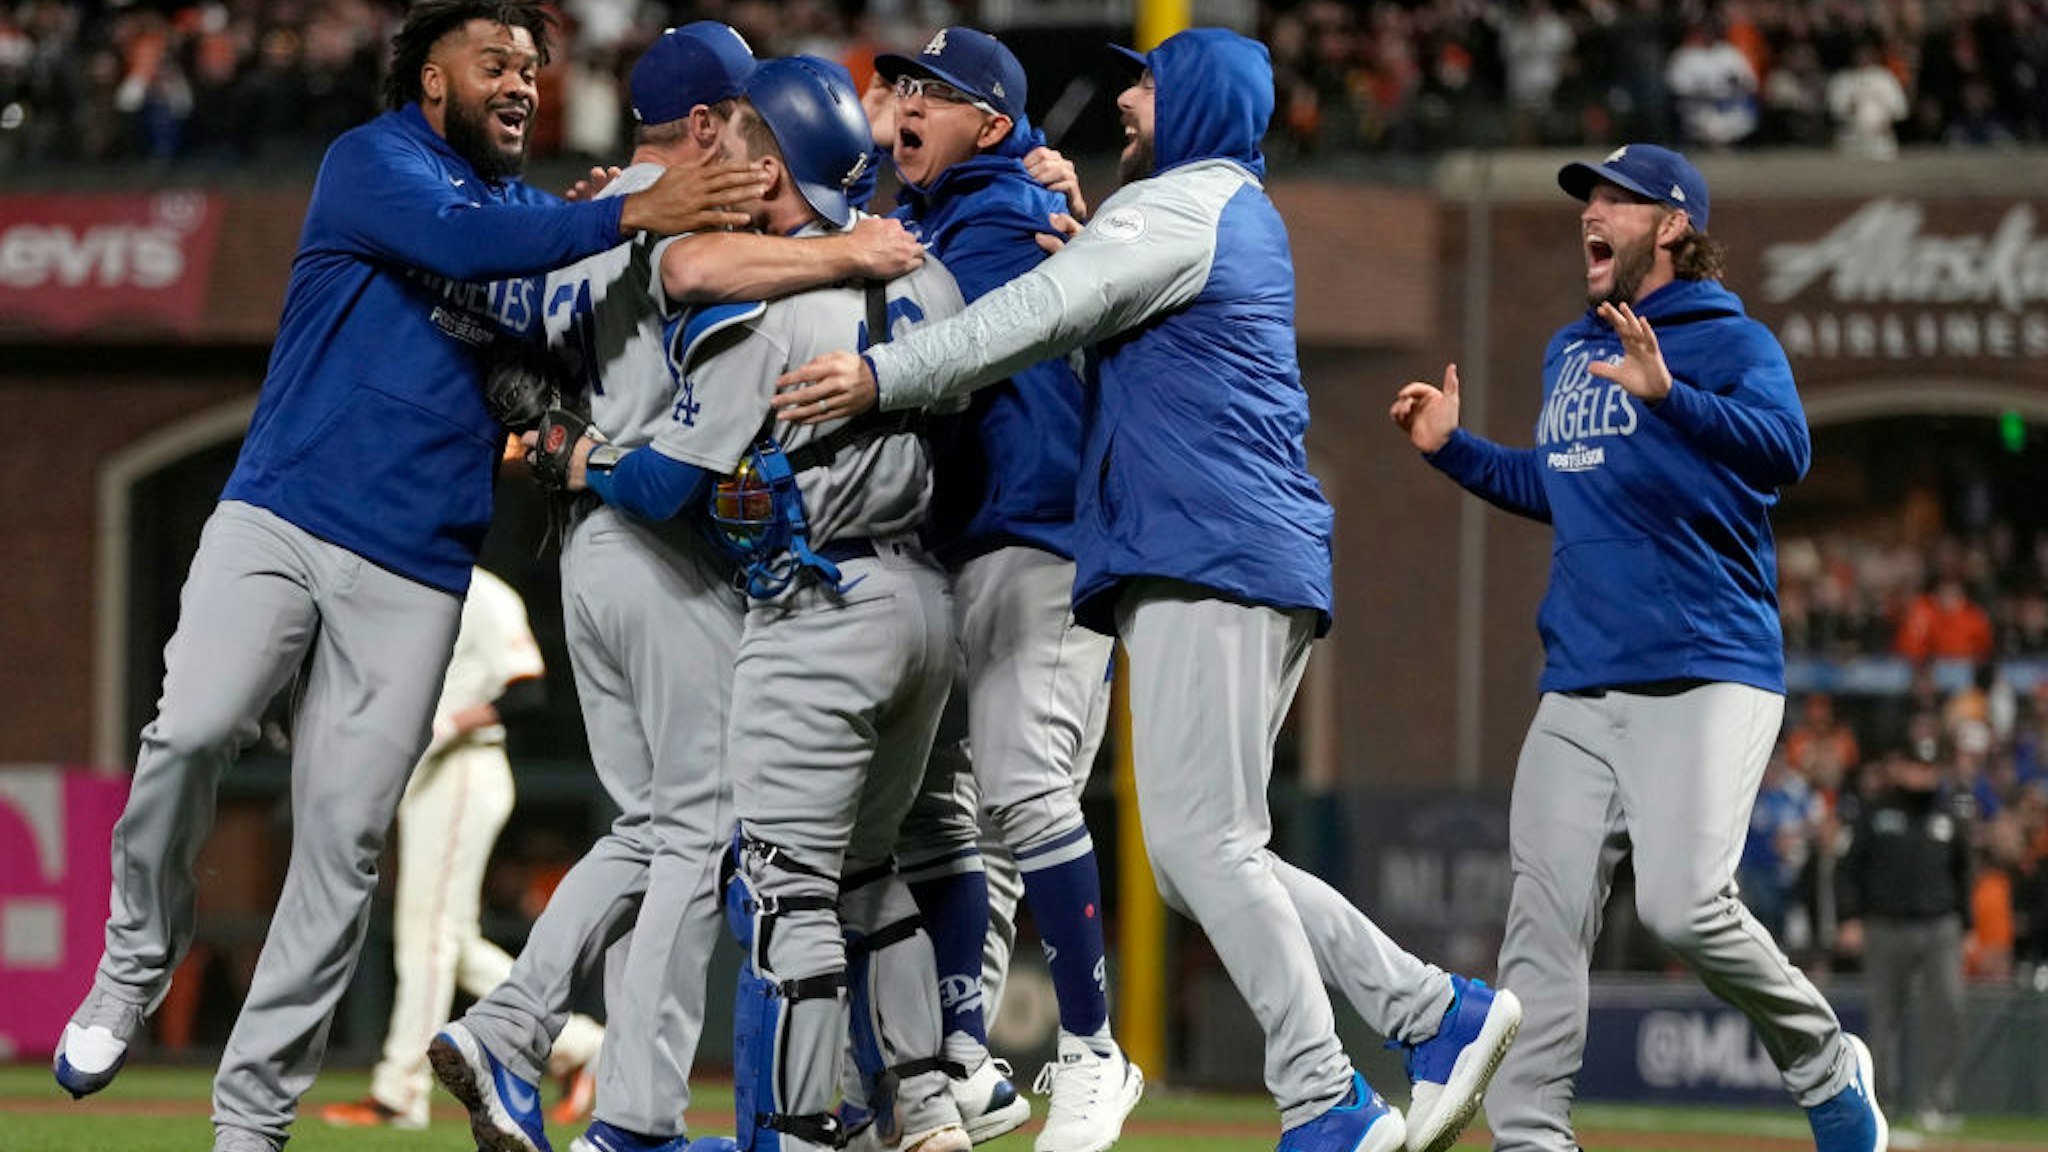 SAN FRANCISCO, CALIFORNIA - OCTOBER 14: The Los Angeles Dodgers celebrate after beating the San Francisco Giants 2-1 in game 5 of the National League Division Series at Oracle Park on October 14, 2021 in San Francisco, California. (Photo by Thearon W. Henderson/Getty Images)